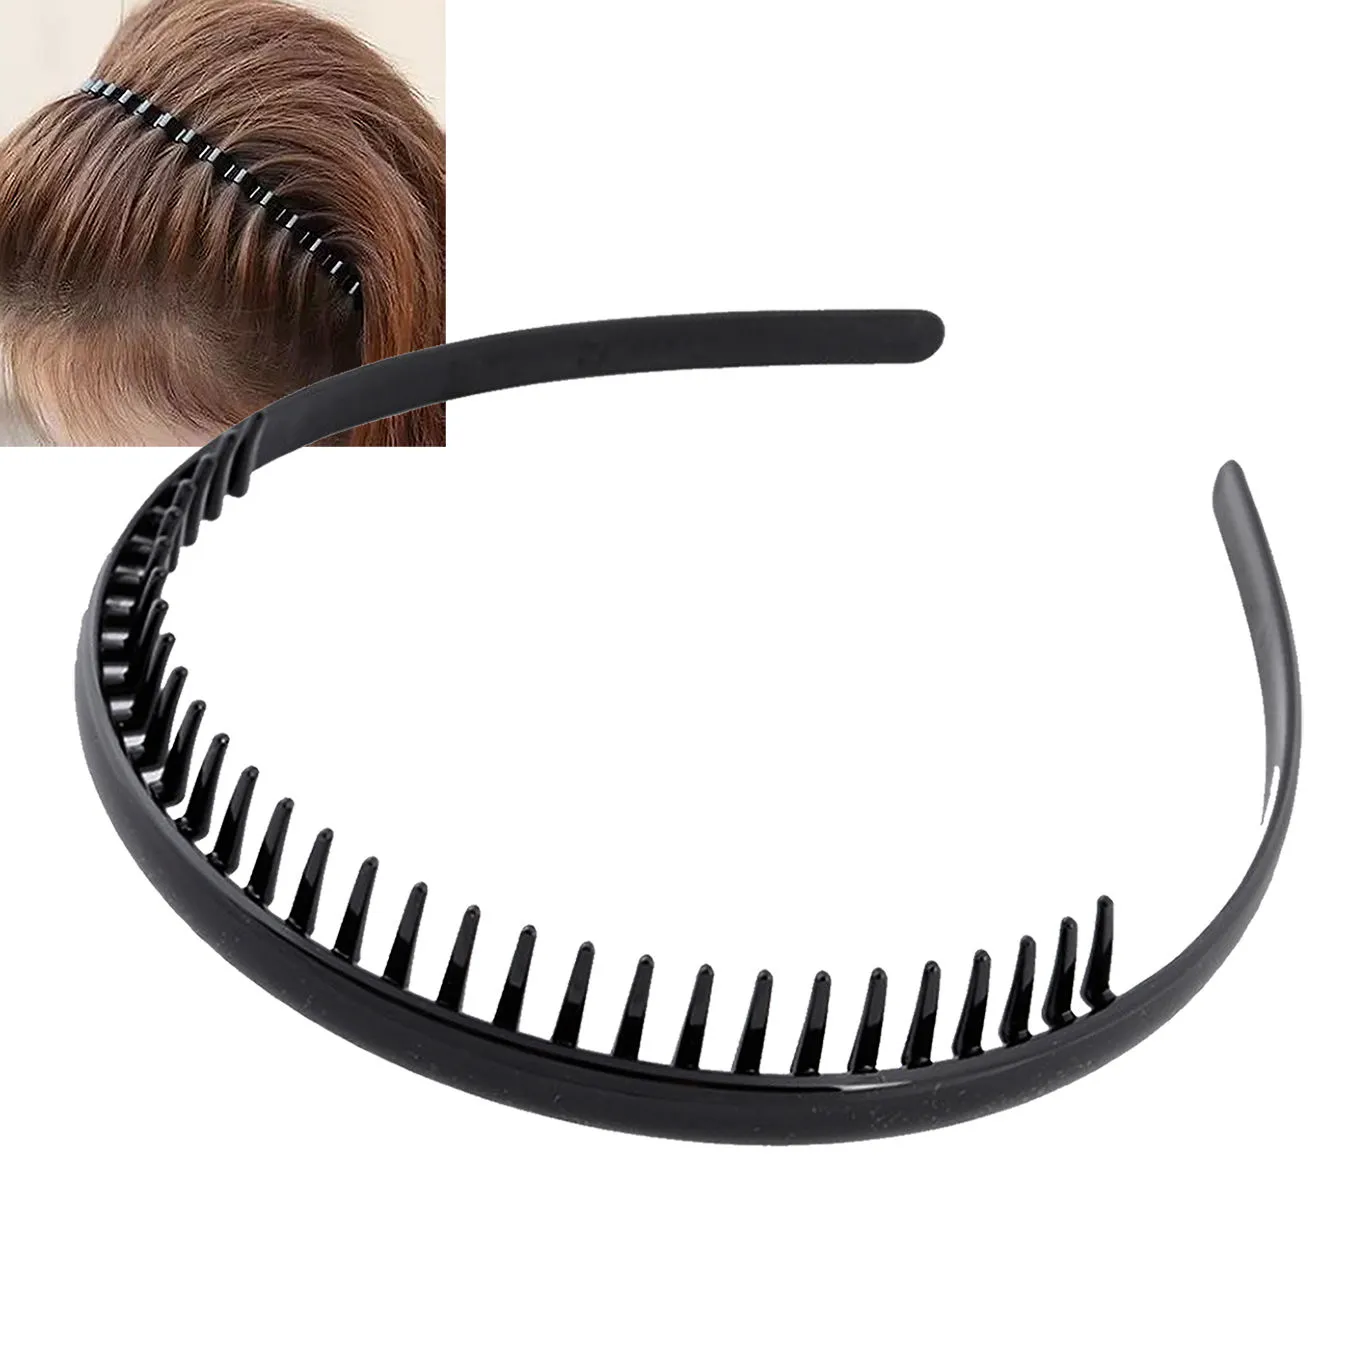 NS Mens Metal Toothed Sports Football Soccer Hair Headband Alice band Black #R49